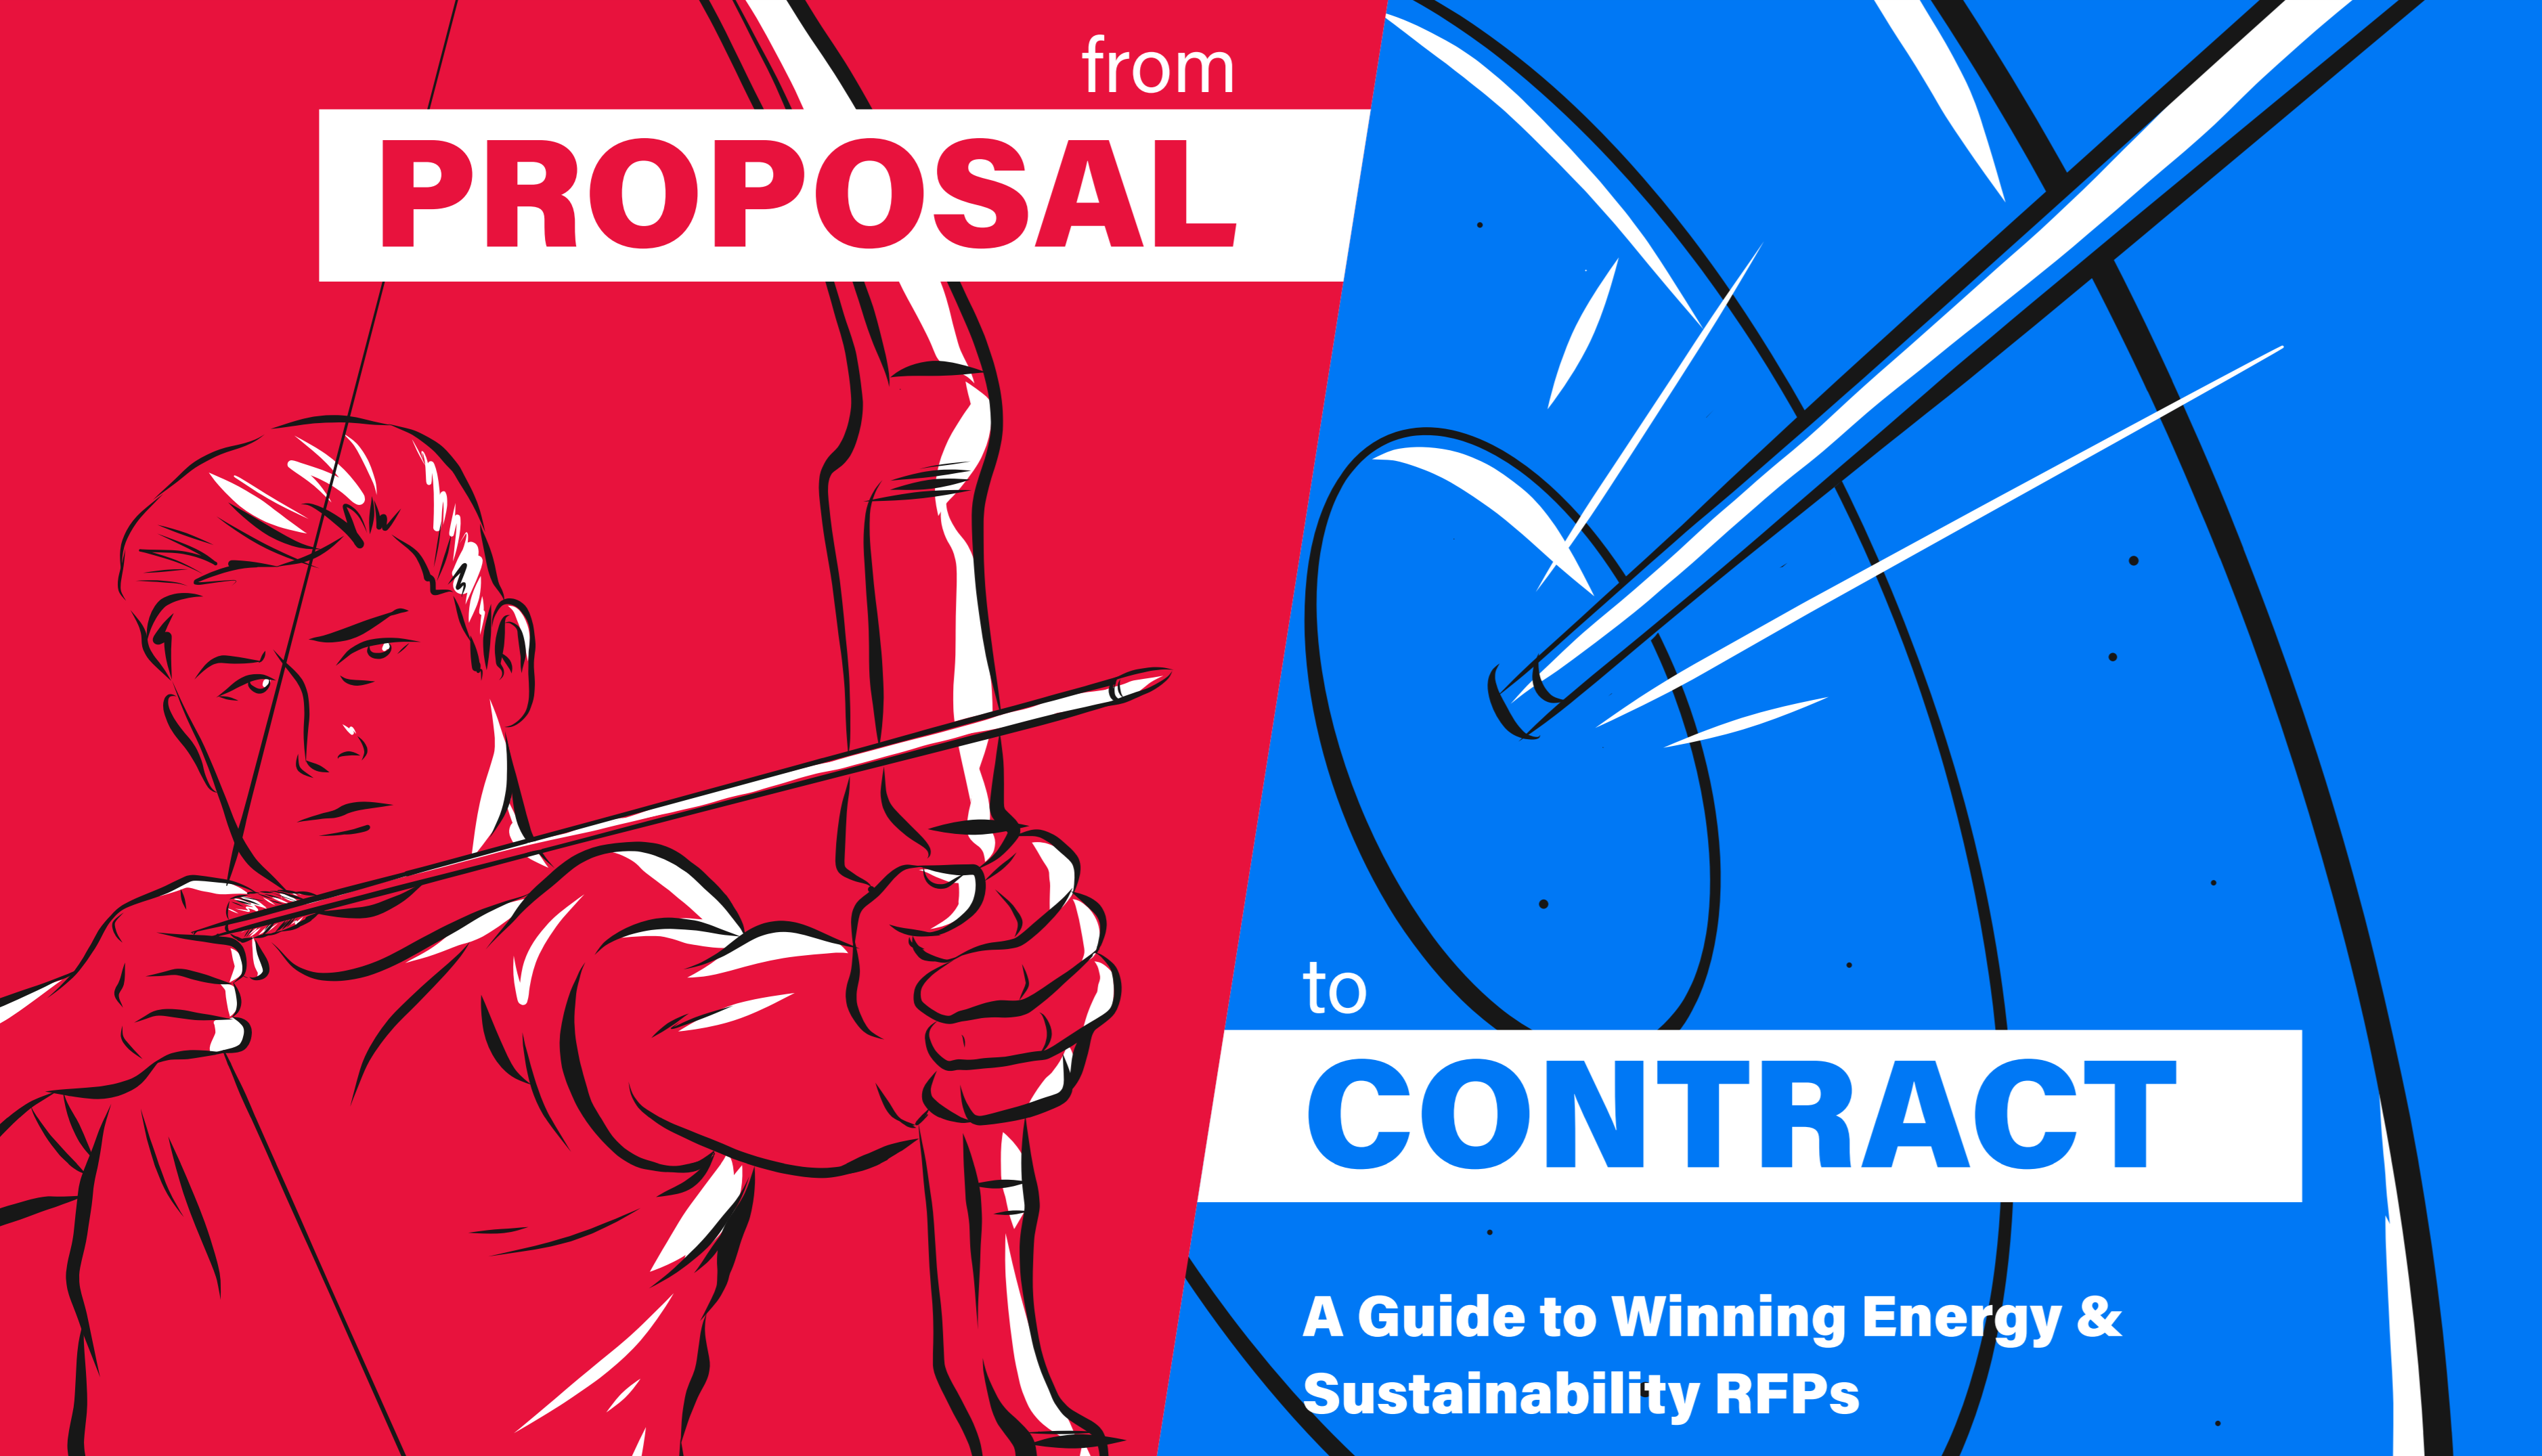 From Proposal to Contract: A Guide to Winning Energy & Sustainability Software RFPs